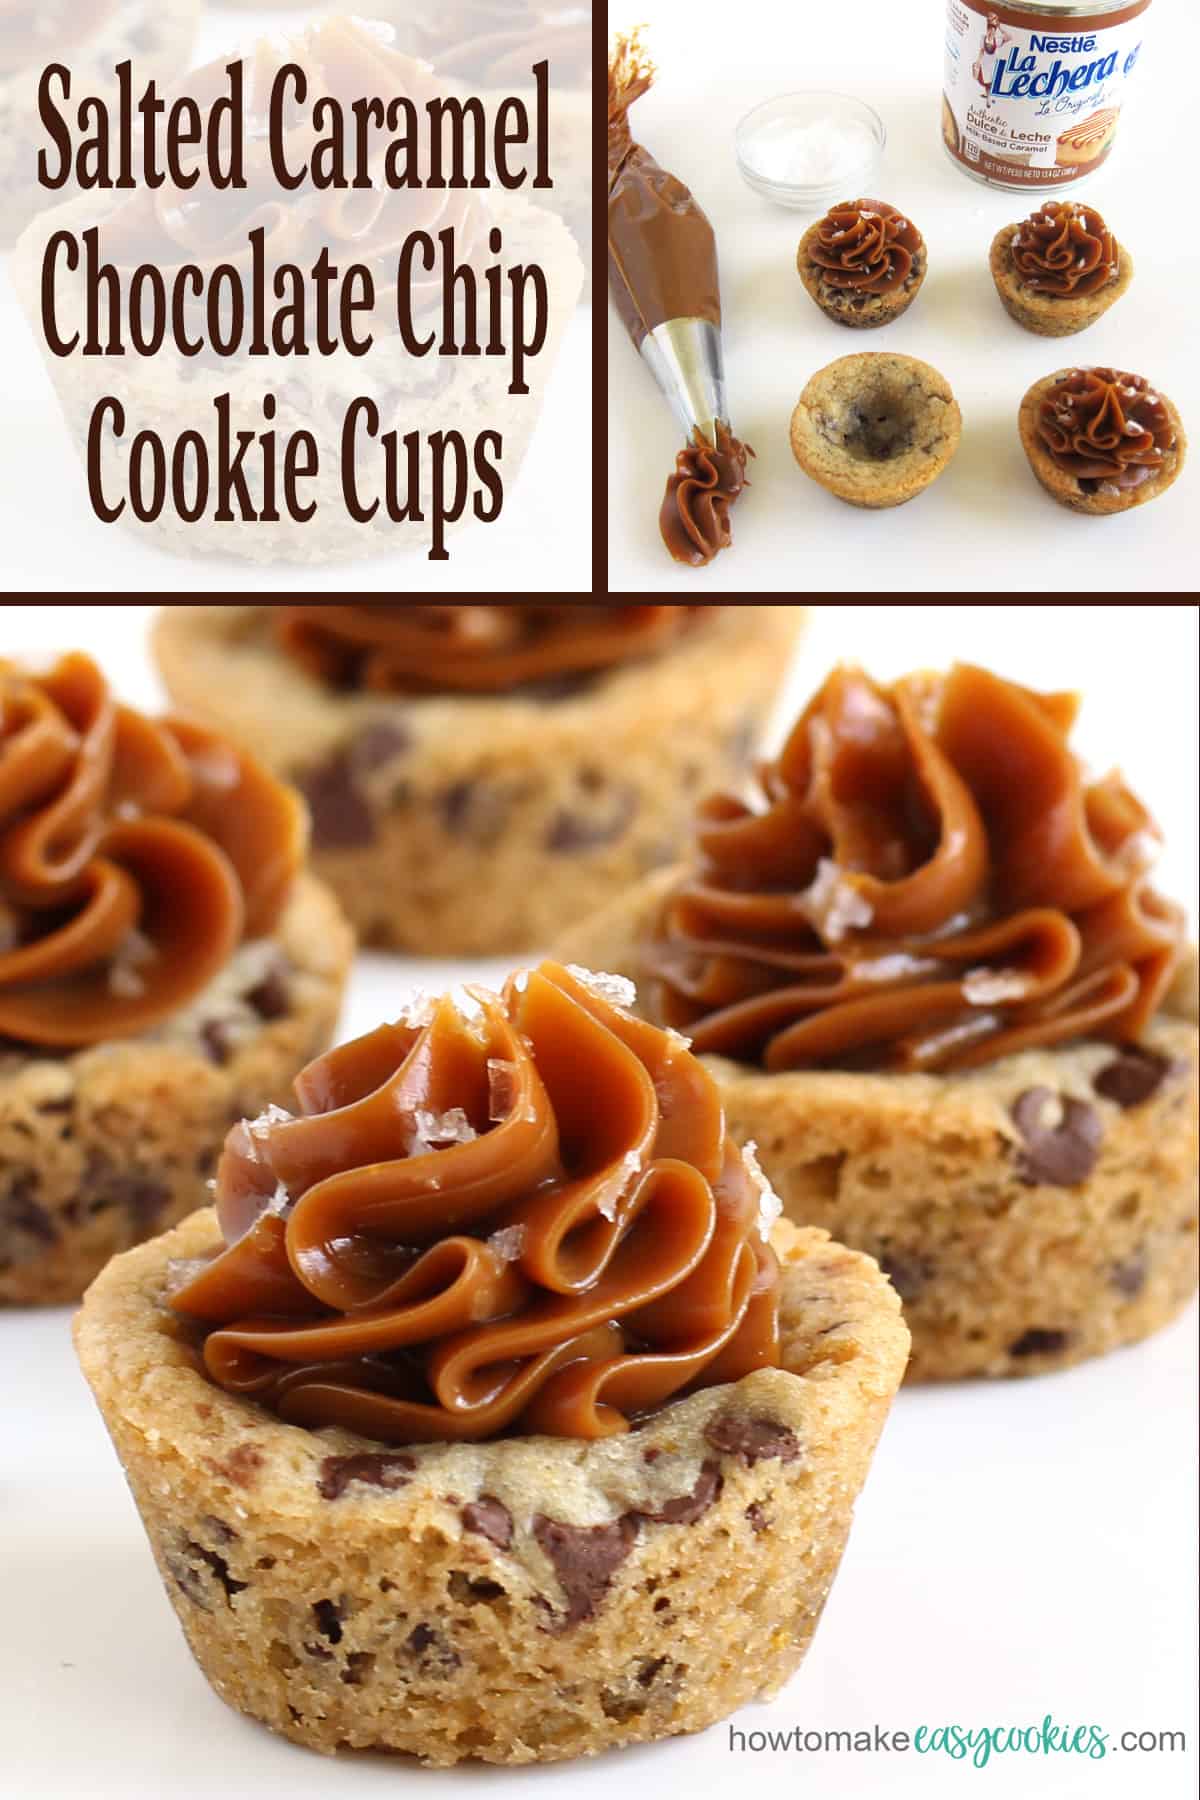 chocolate chip cookie cups topped with salted caramel